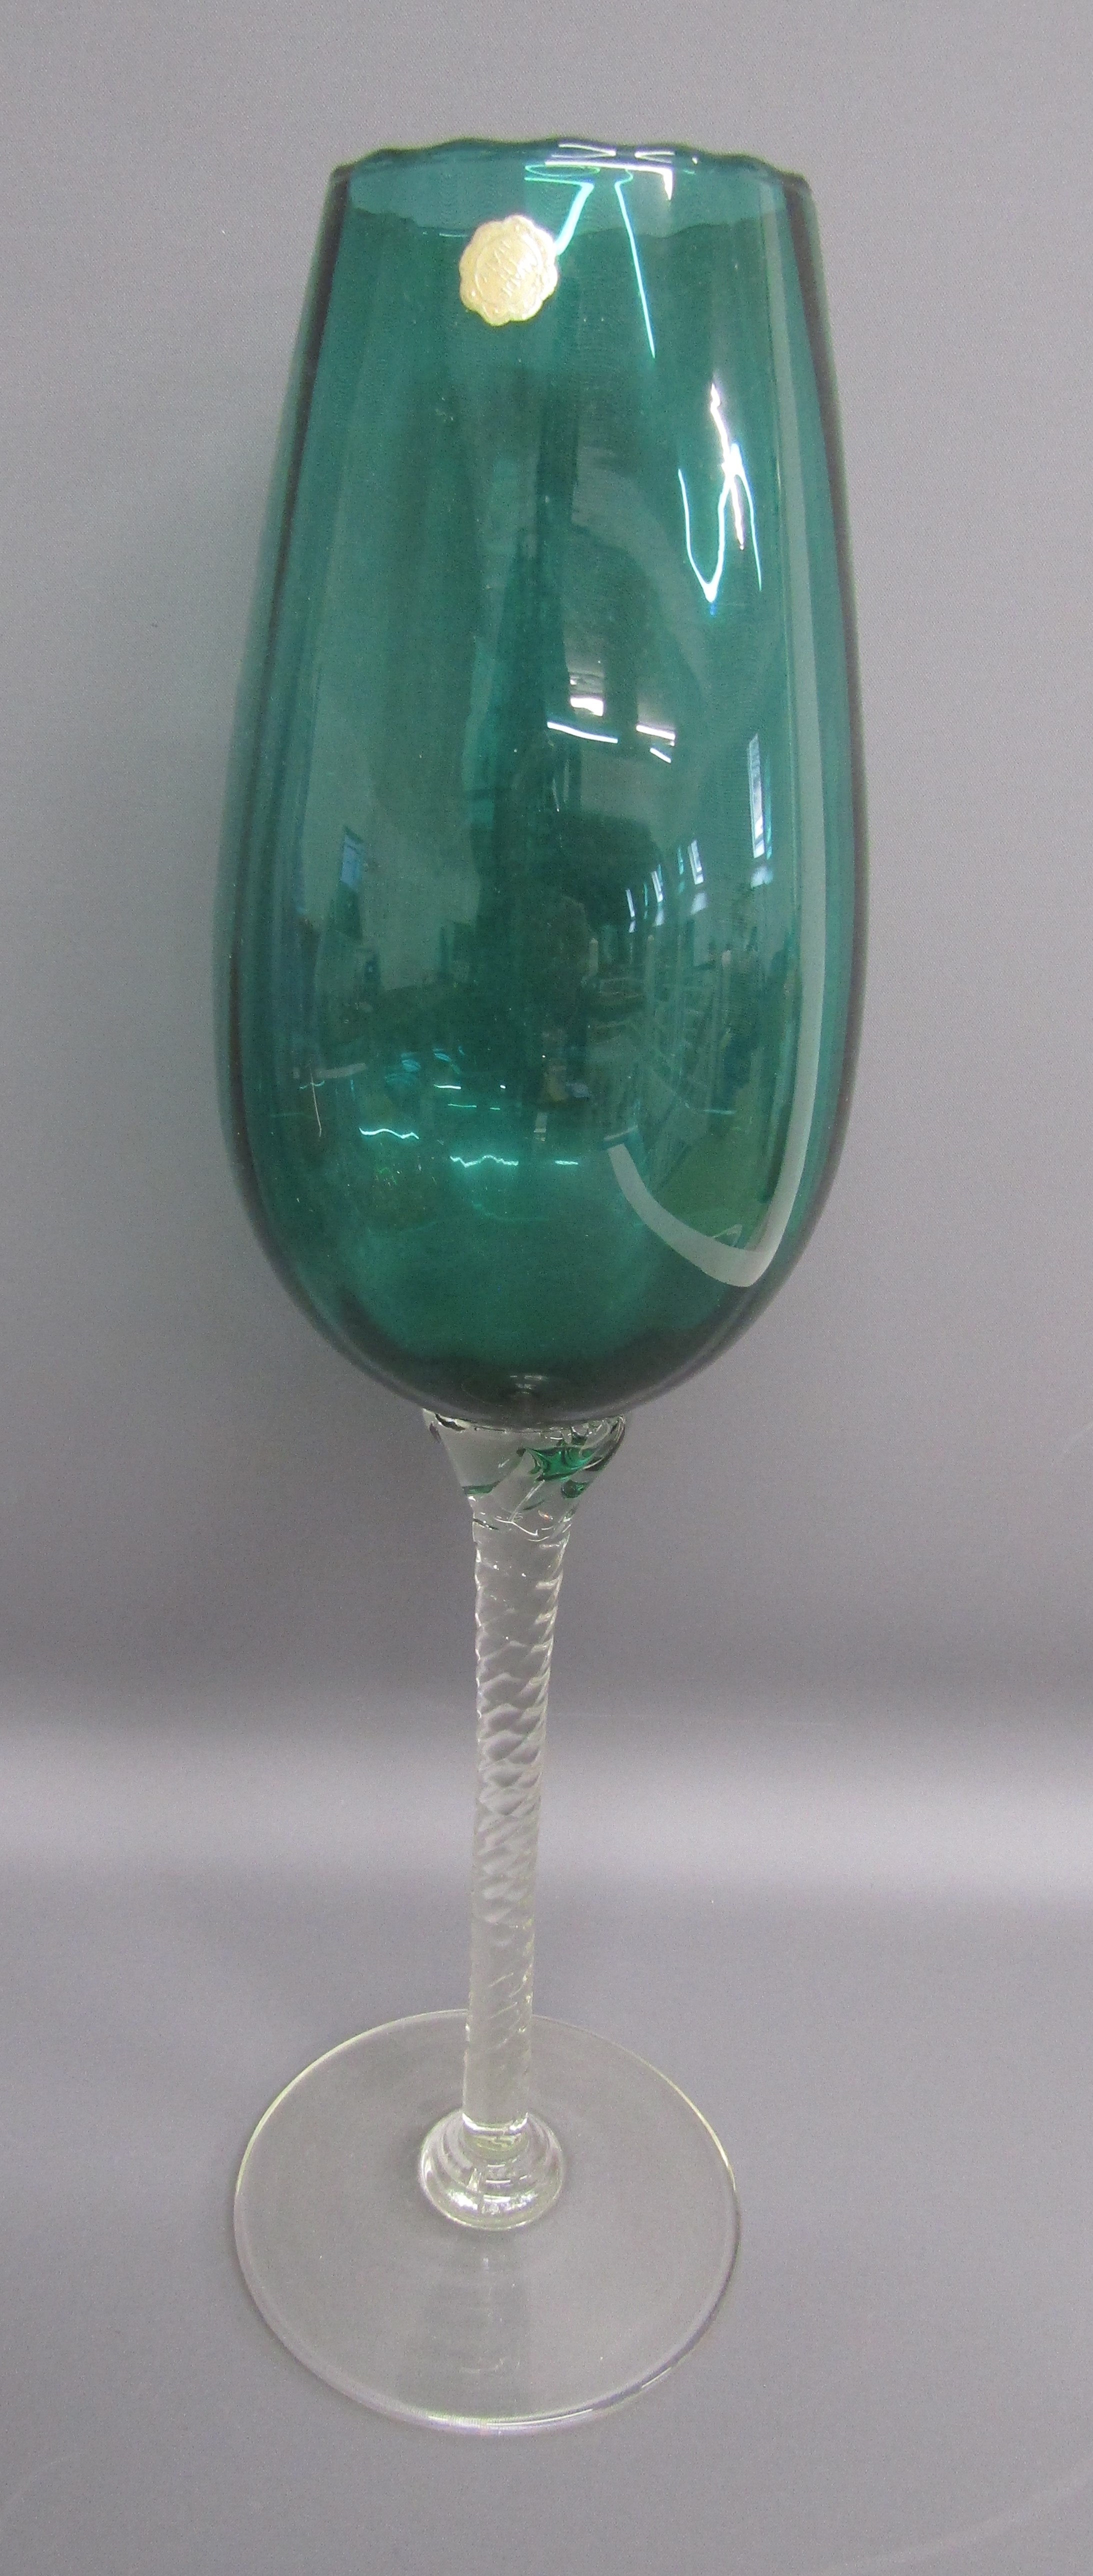 Collection of coloured glass includes over-sized green glass wine glass and purple charger, red jug, - Image 2 of 6